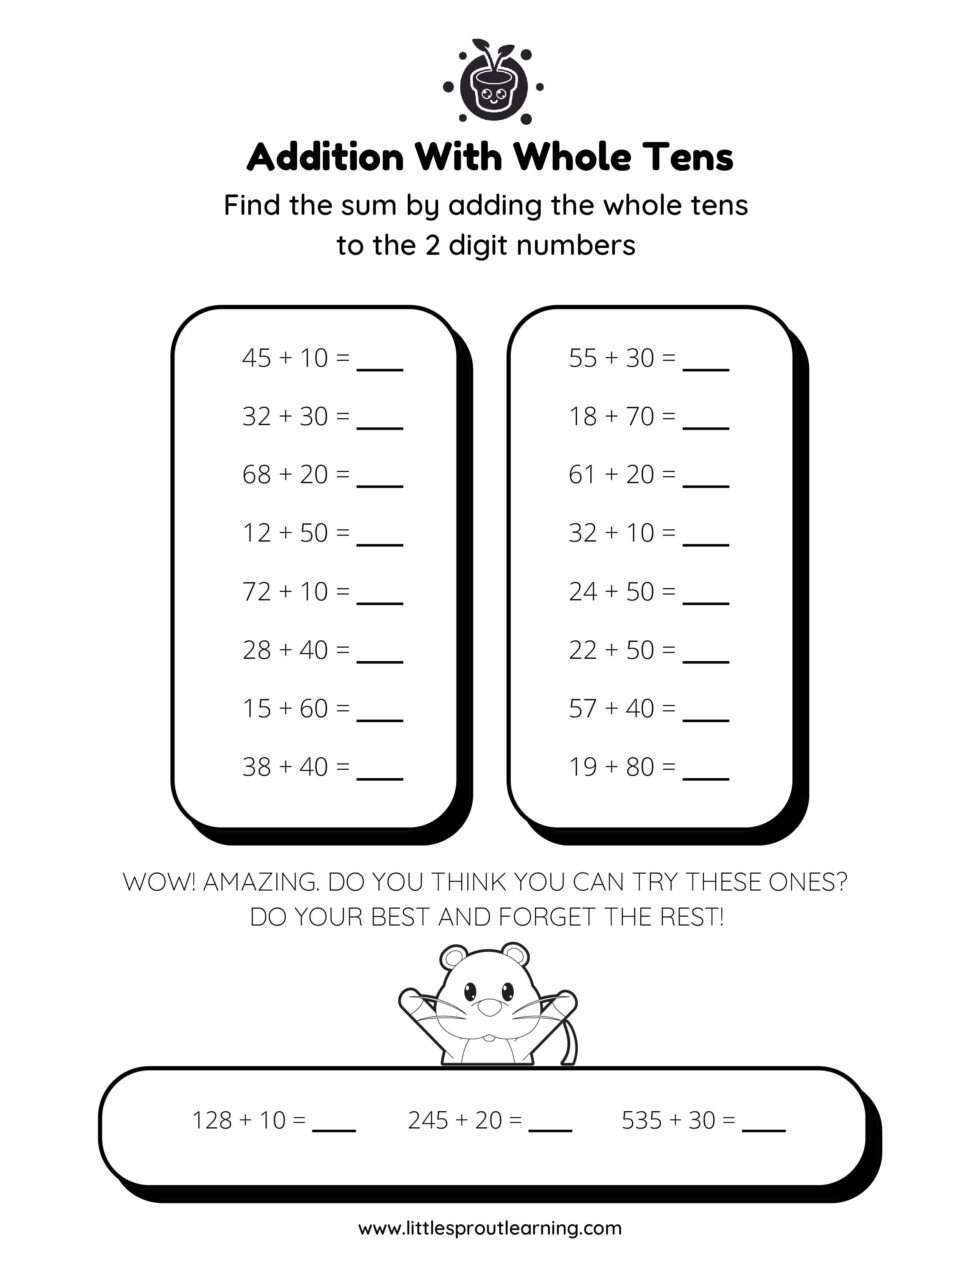 grade-3-addition-worksheet-adding-whole-tens-to-2-digit-numbers